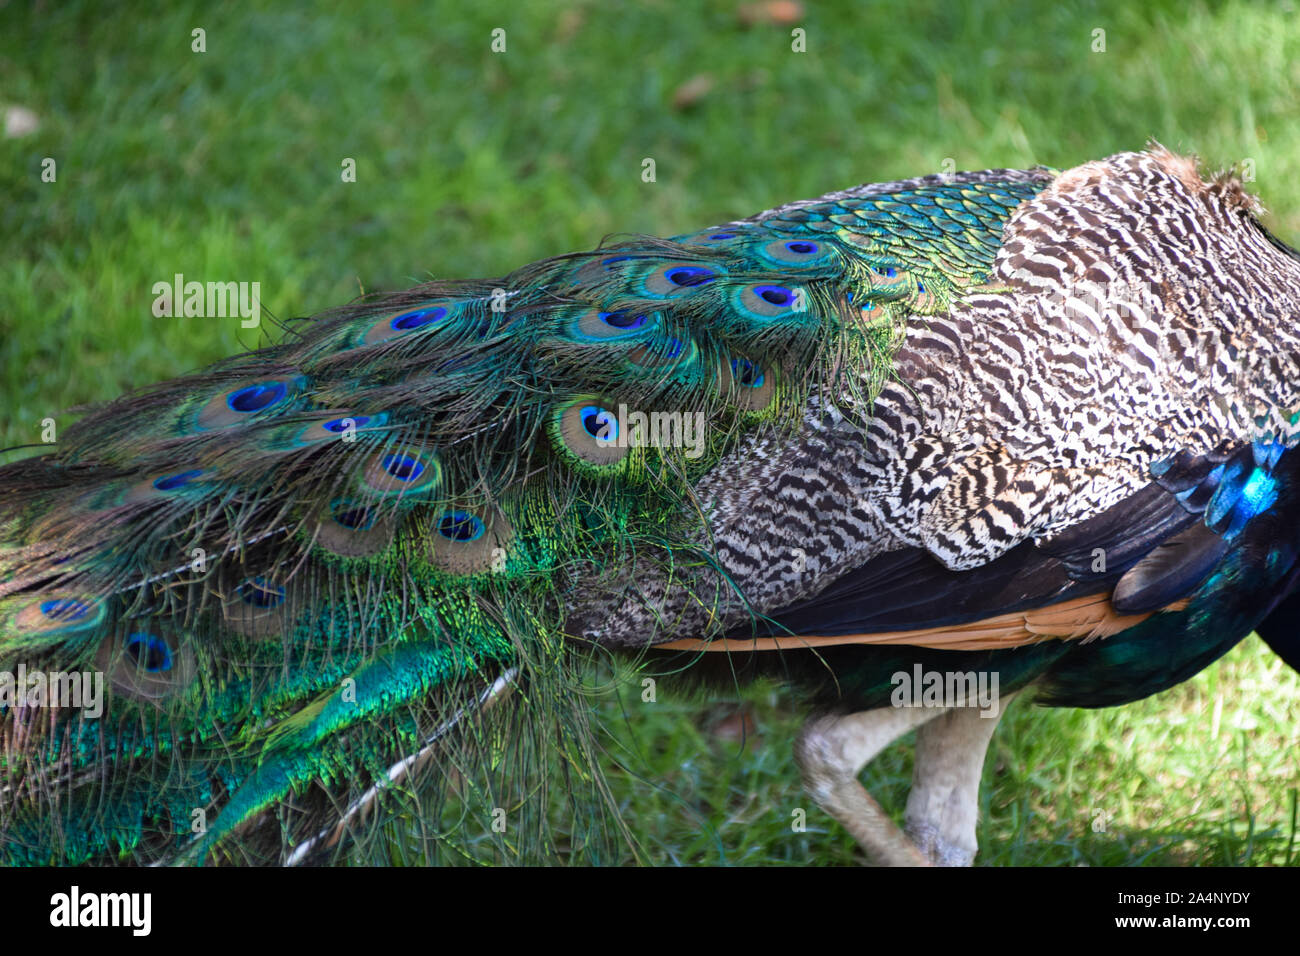 Peacock's tail feathers Stock Photo